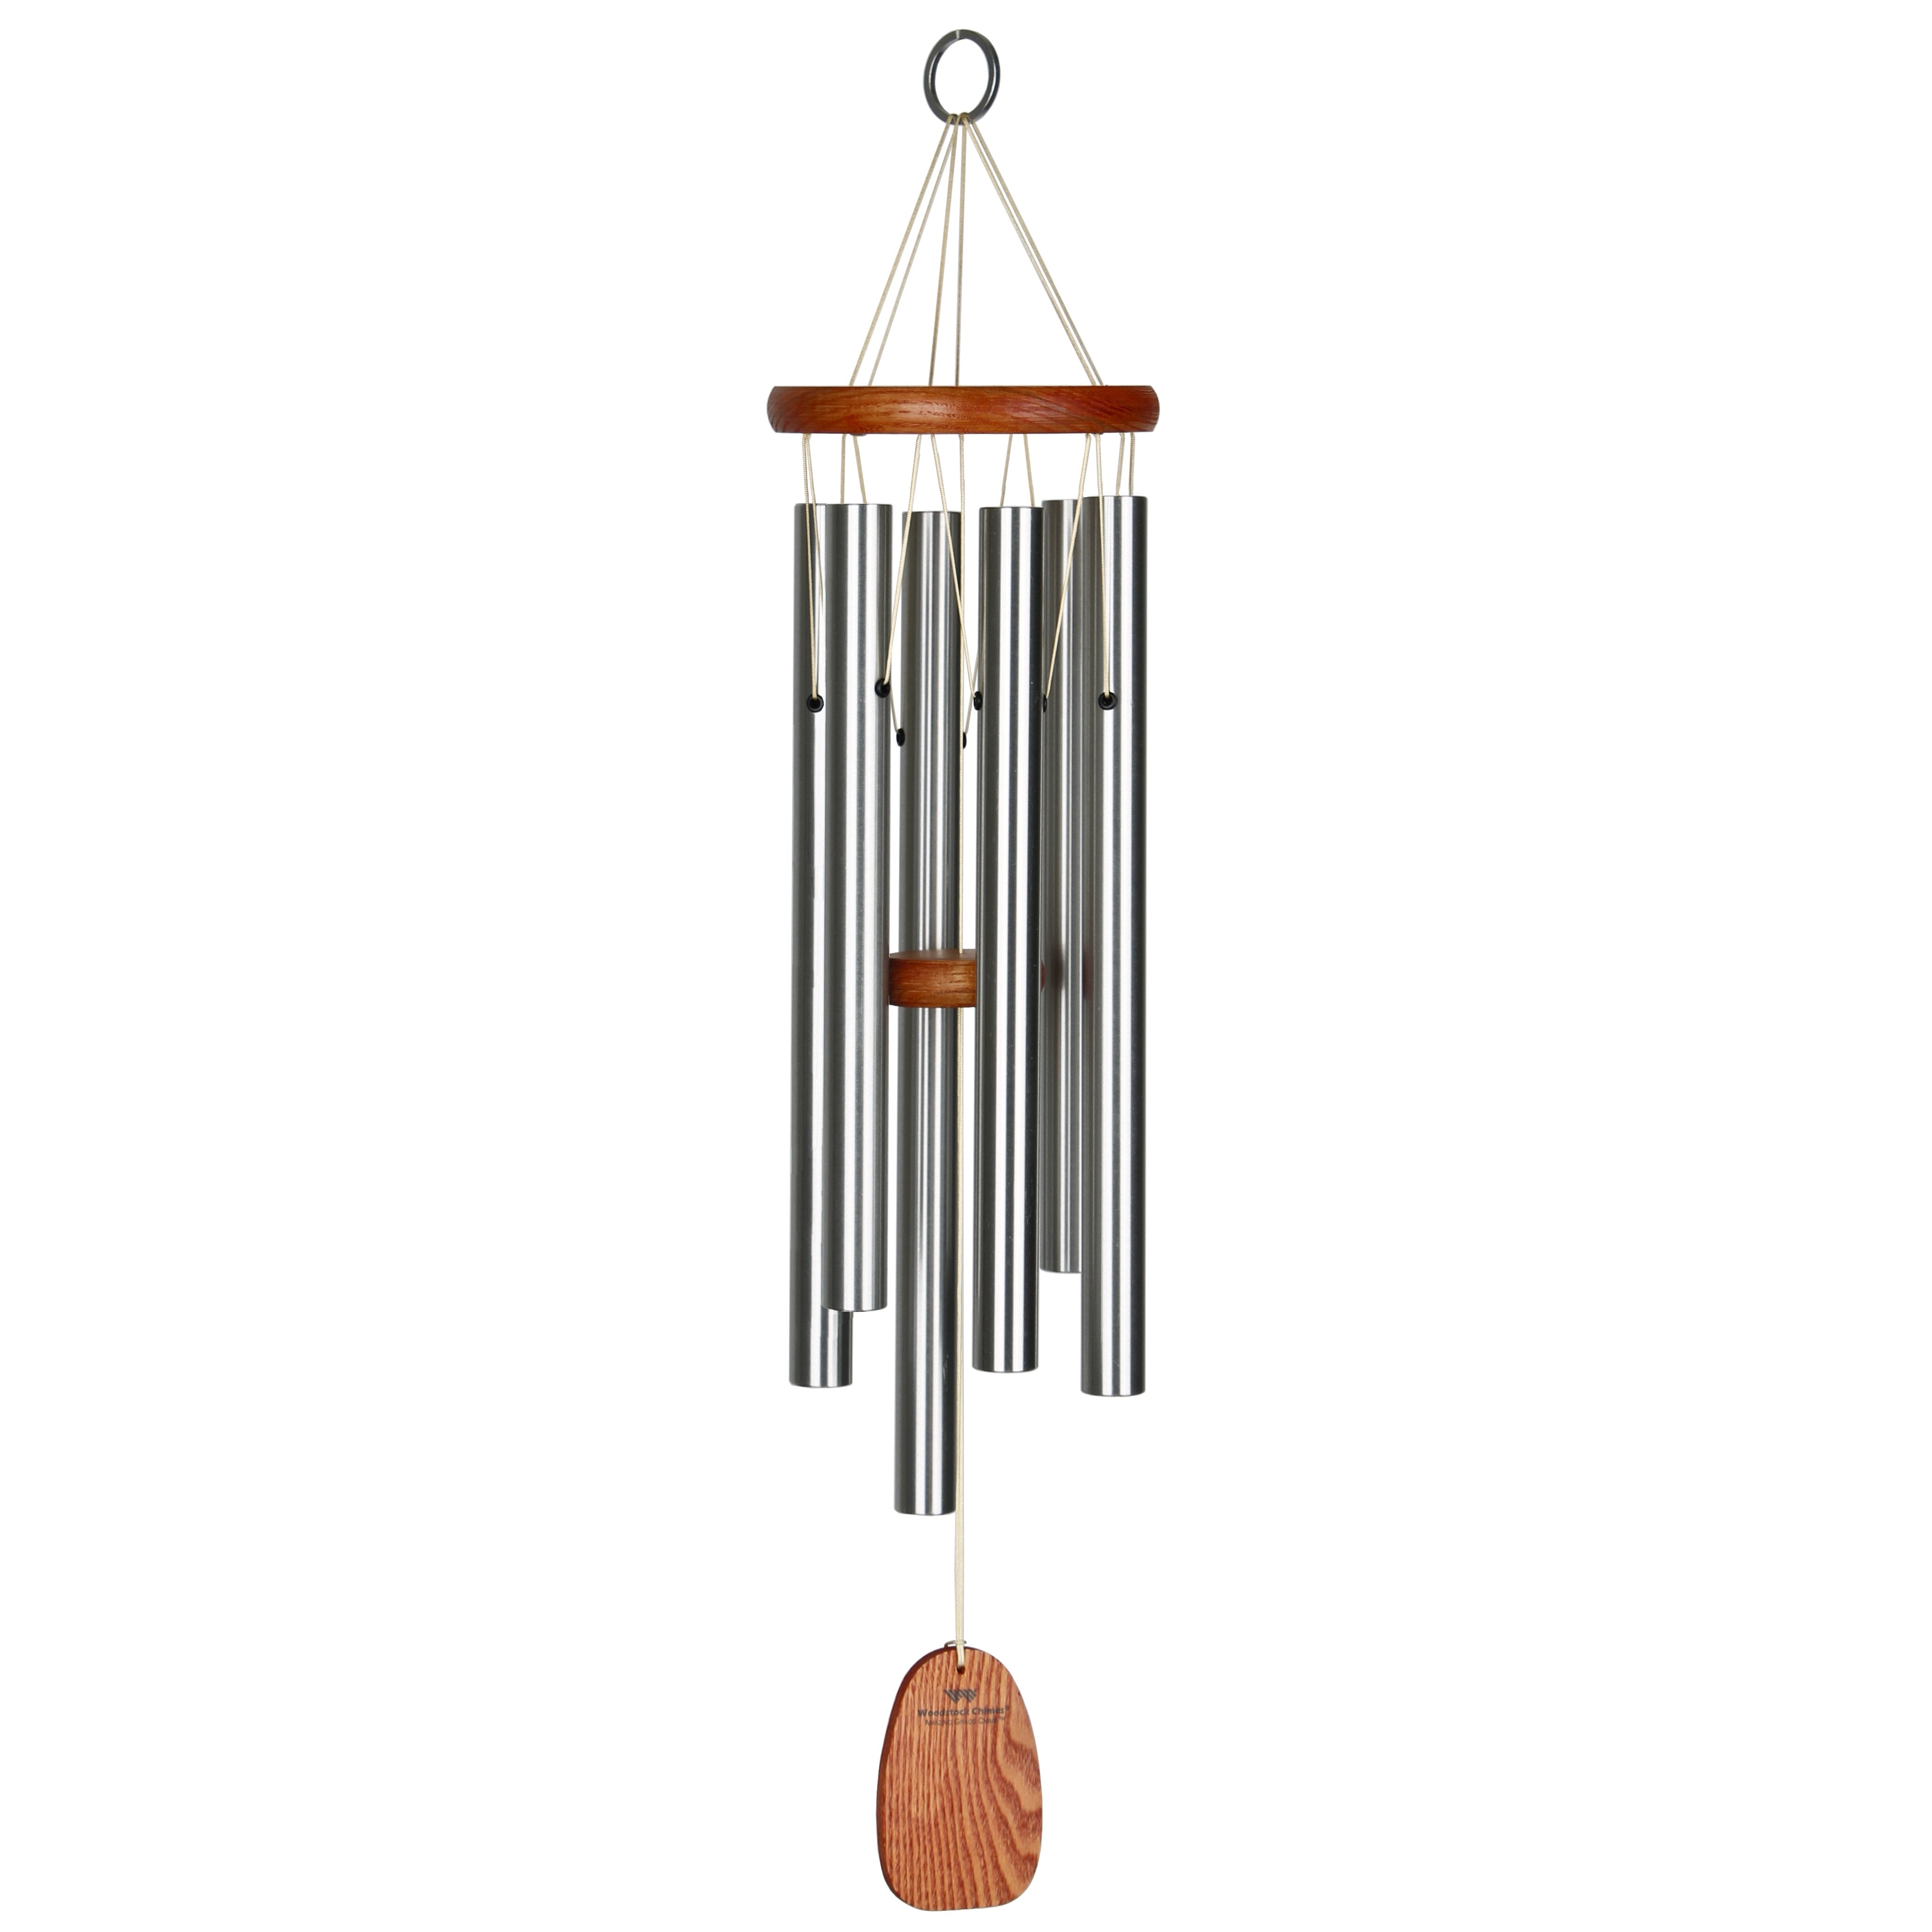 Amazing Grace Chime - Medium, Silver by Woodstock Chimes